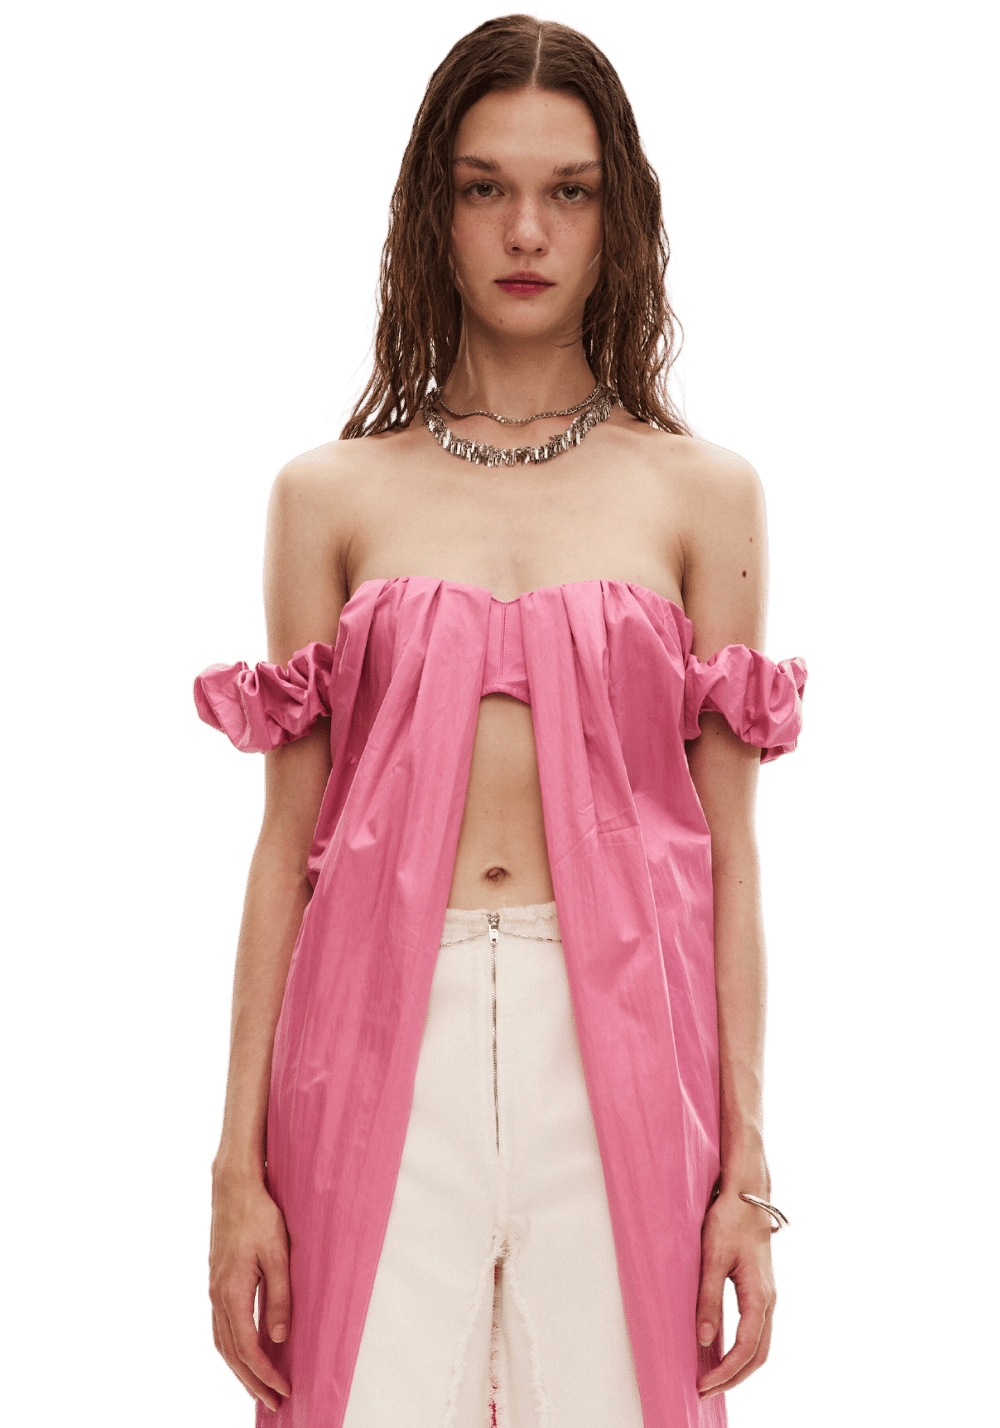 Strapless Ruffled Bubble Sleeve Top - PSYLOS 1, Strapless Ruffled Bubble Sleeve Top, T-Shirt, LEEWEI, PSYLOS 1